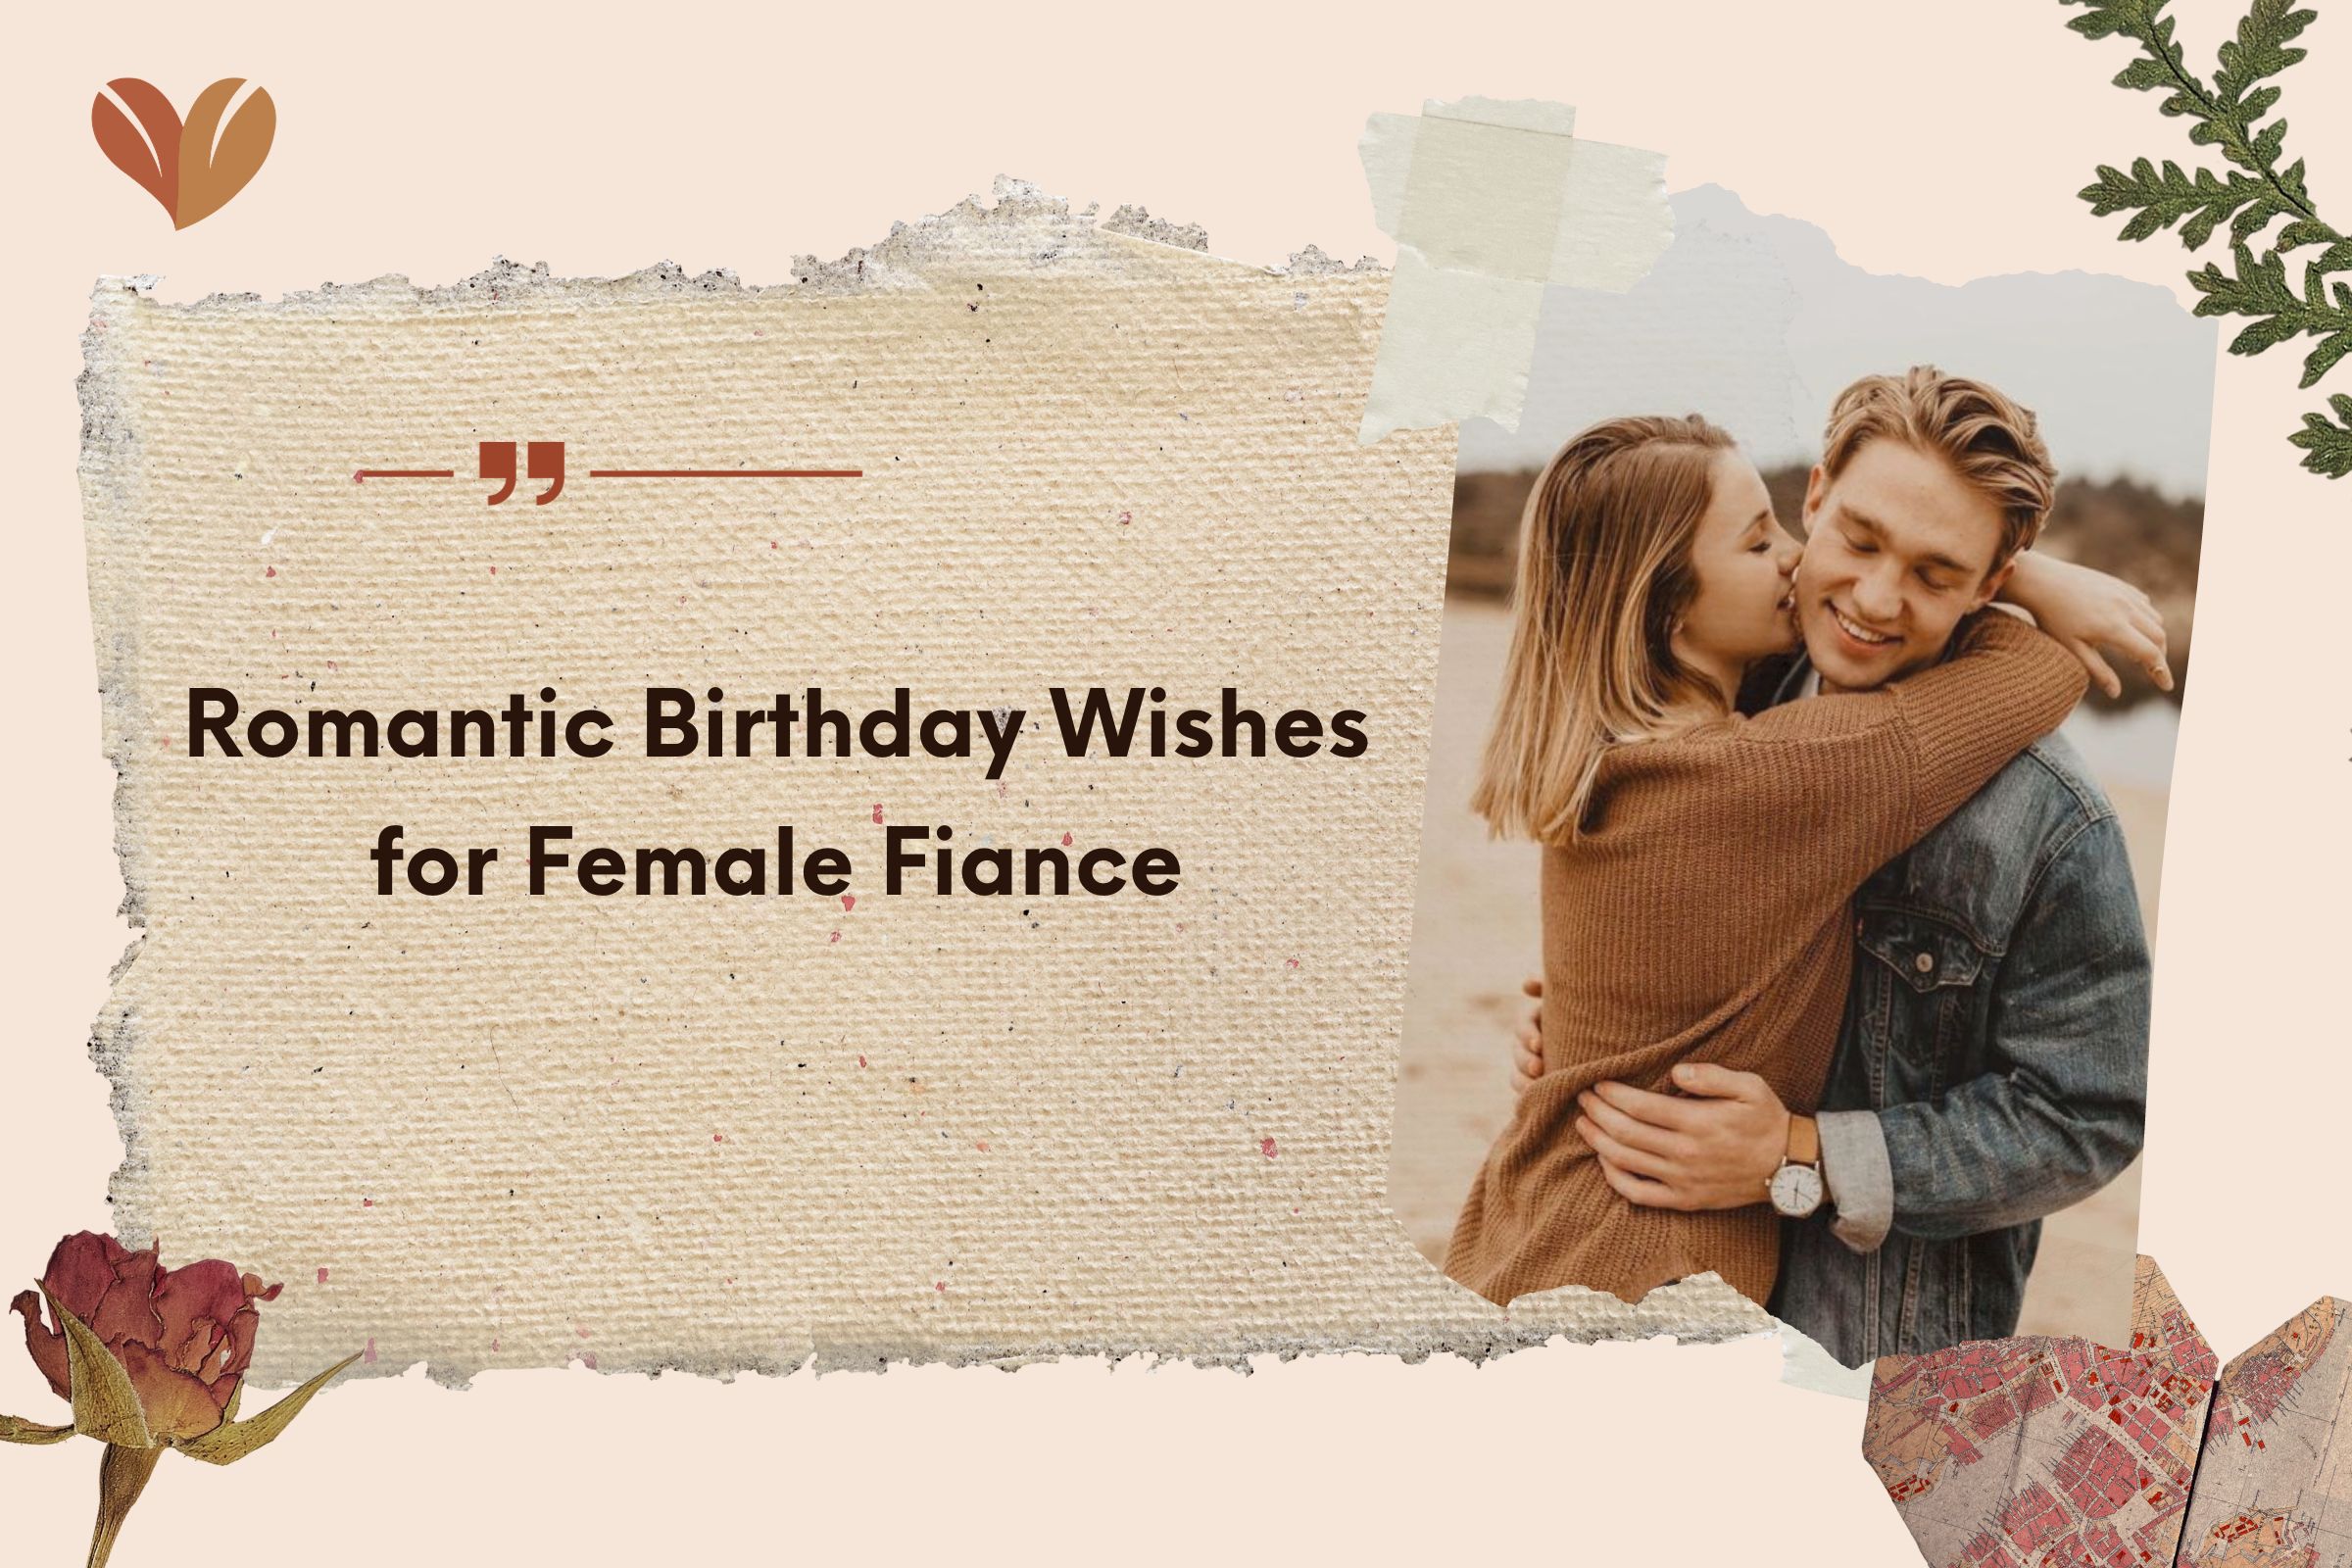 Romantic Birthday Wishes for Female Fiance